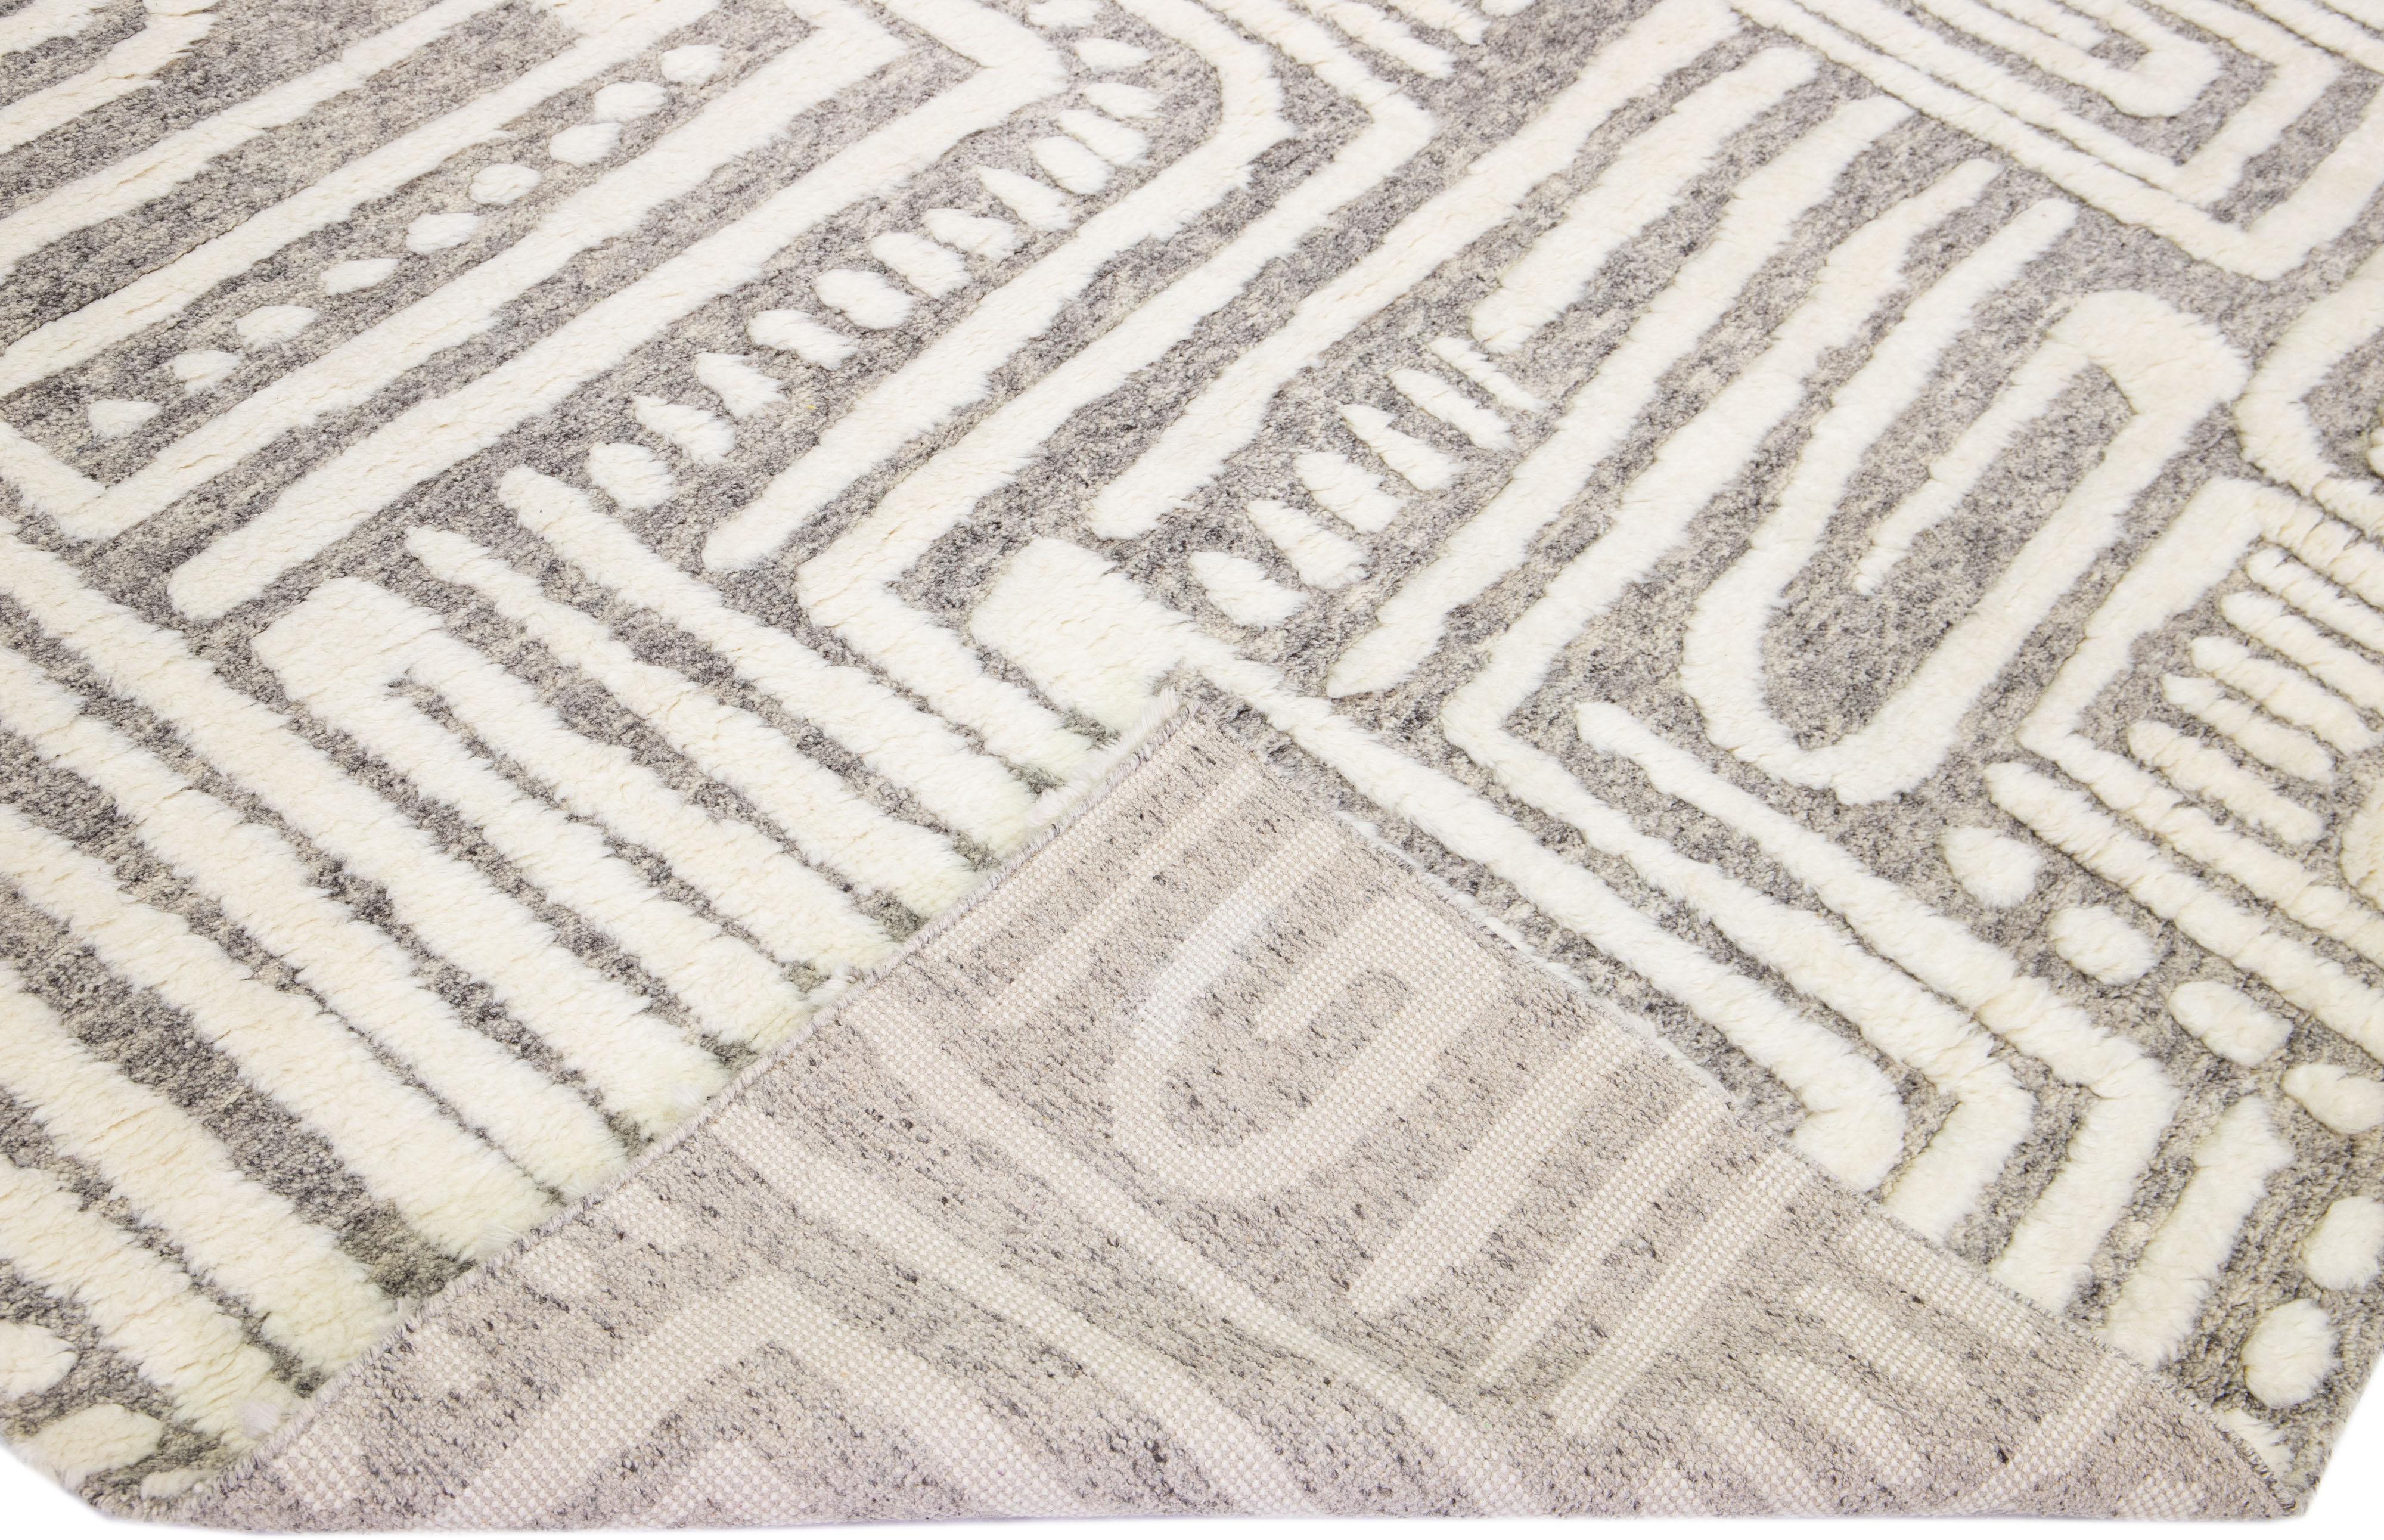 Beautiful modern Moroccan style hand-knotted wool rug with a light gray color field and ivory accents in a gorgeous abstract high pile design.

This rug measures: 9'10